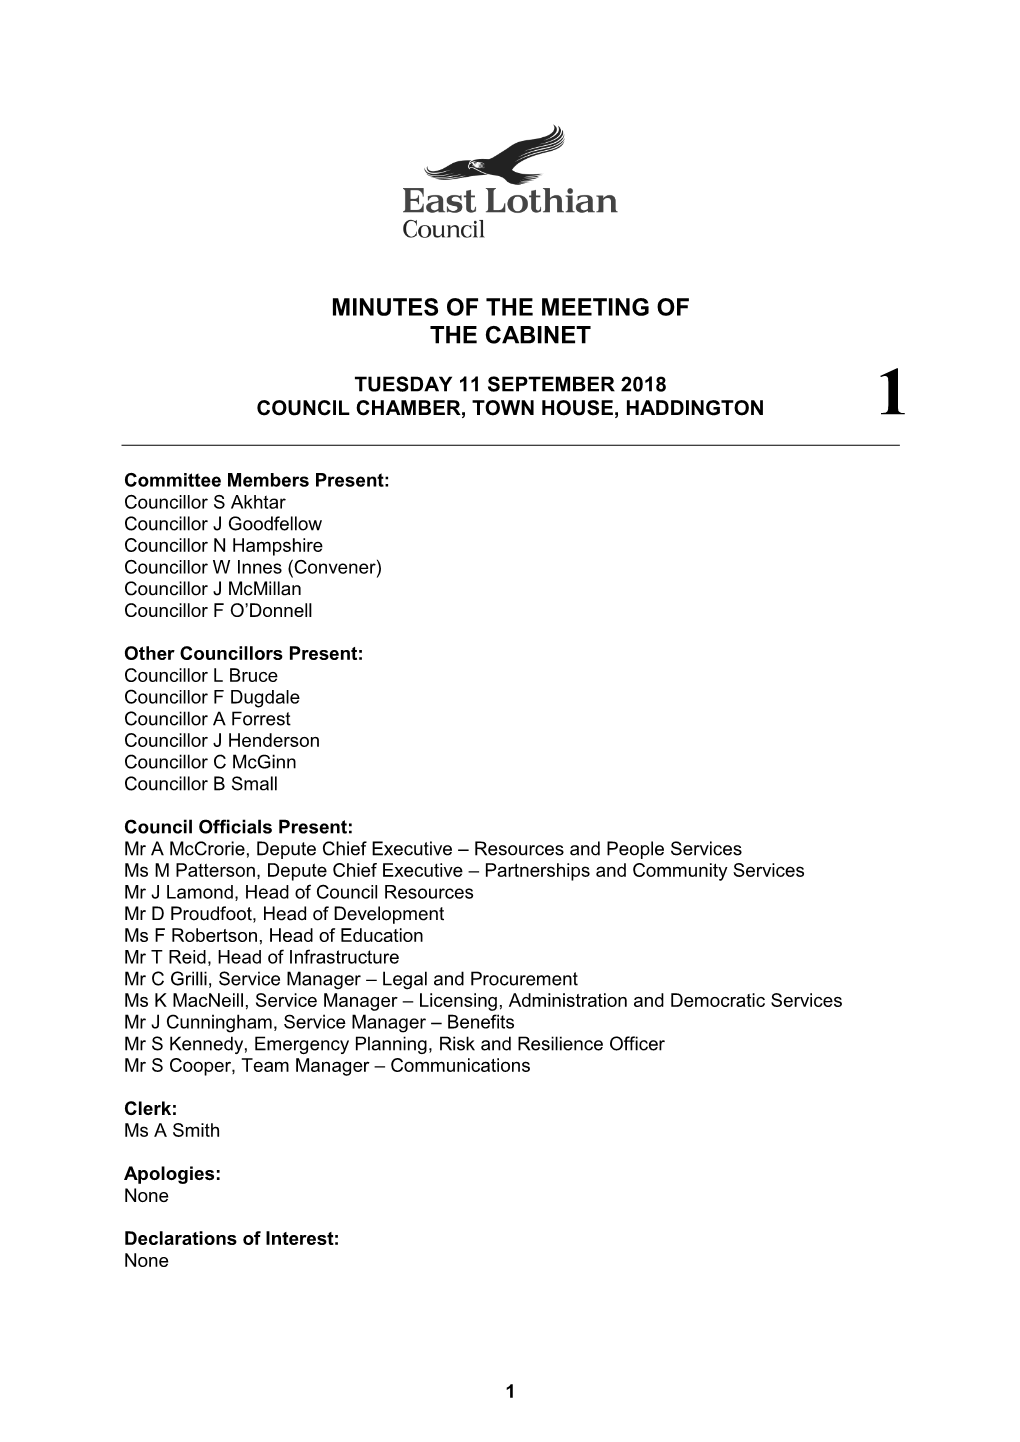 Minutes of the Meeting of the Cabinet